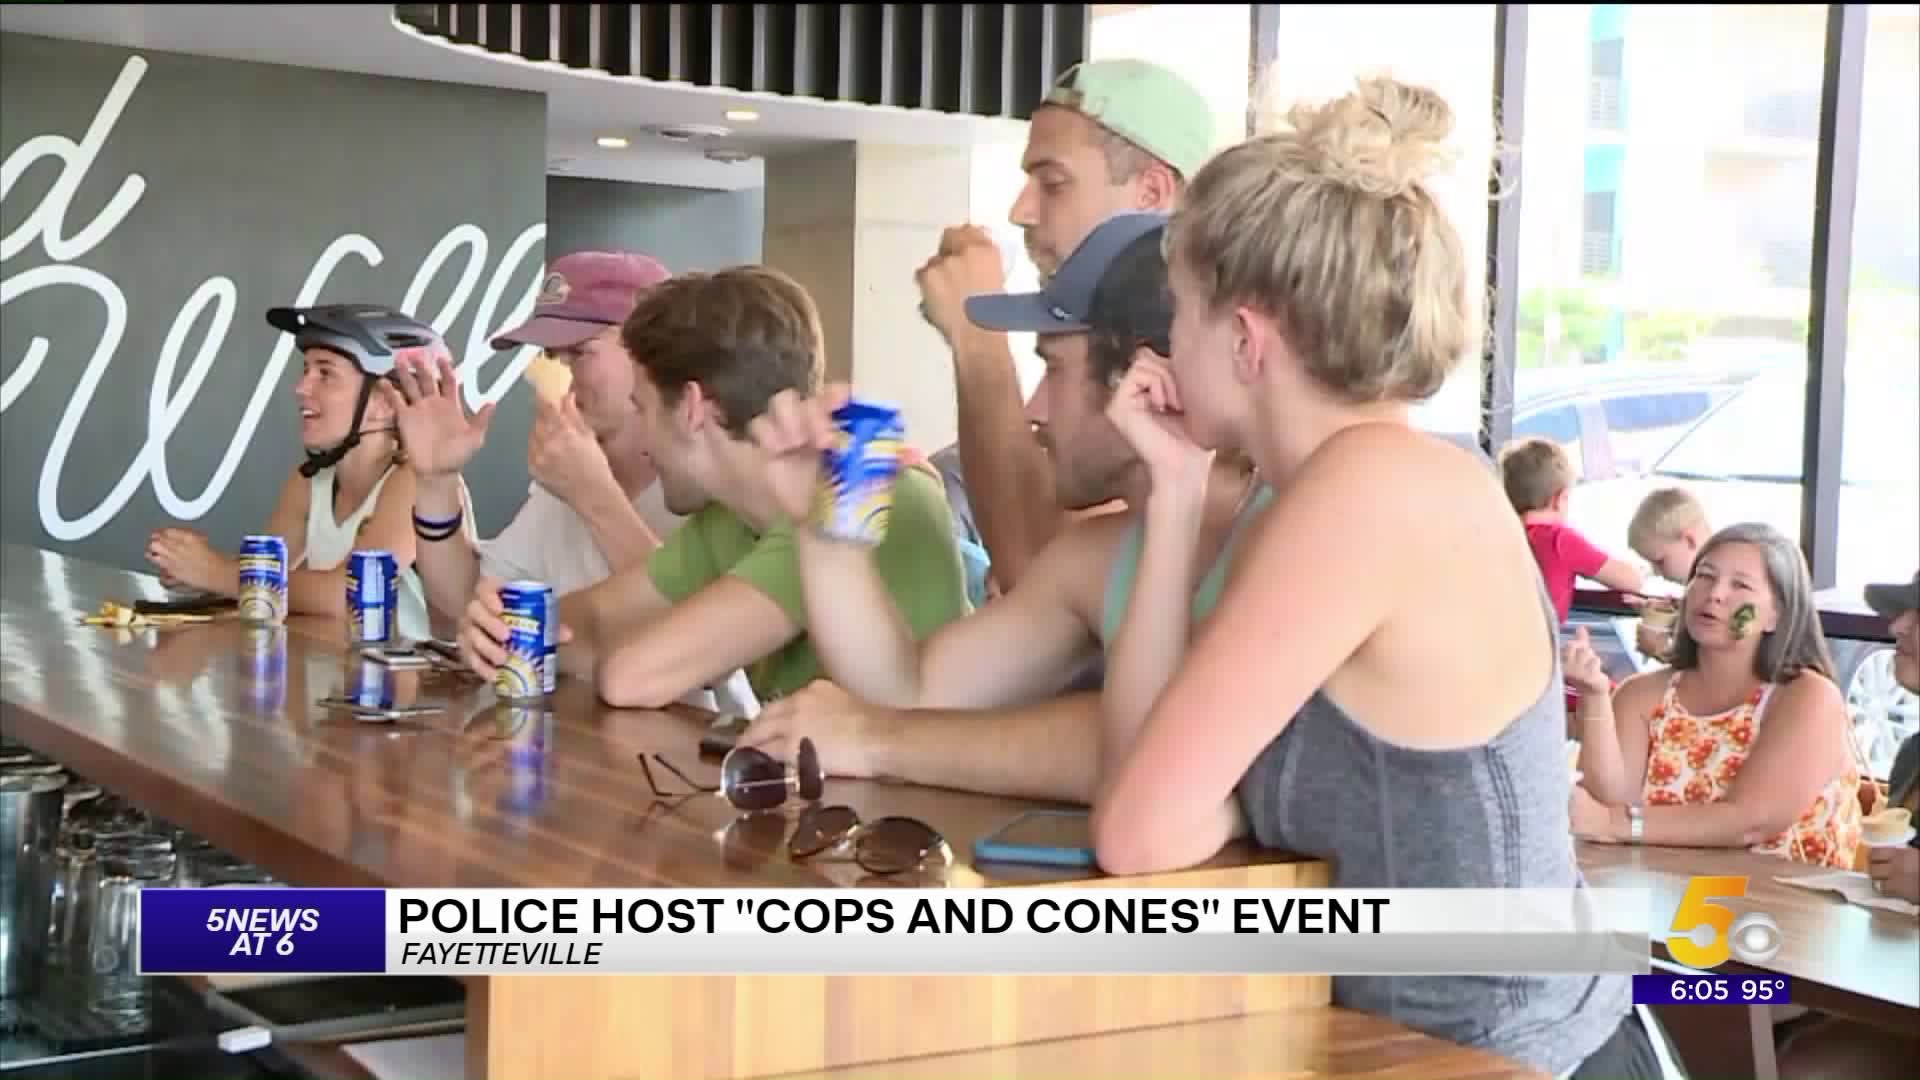 Fayetteville Police Host "Cops And Cones" Event